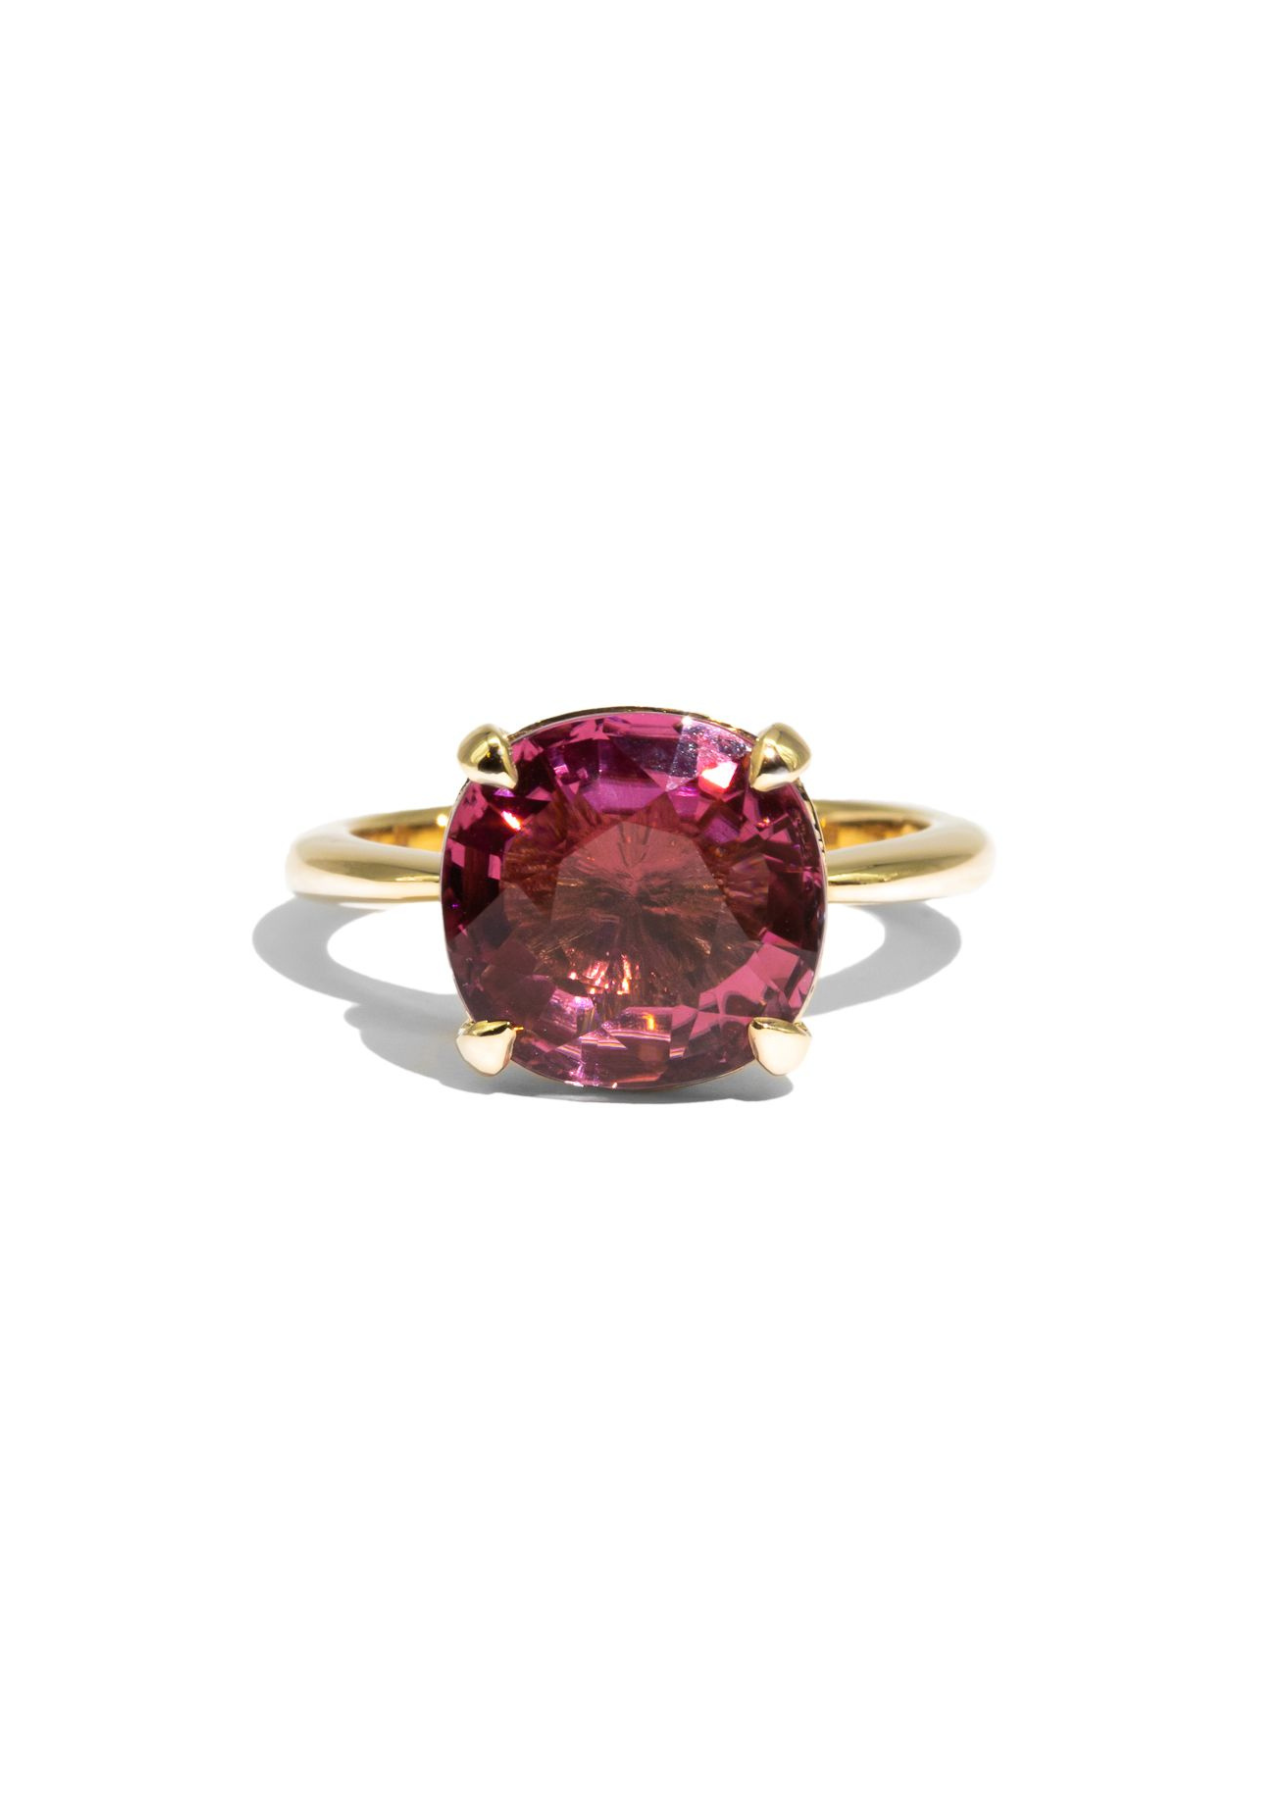 The June Ring with 5.05ct Tourmaline